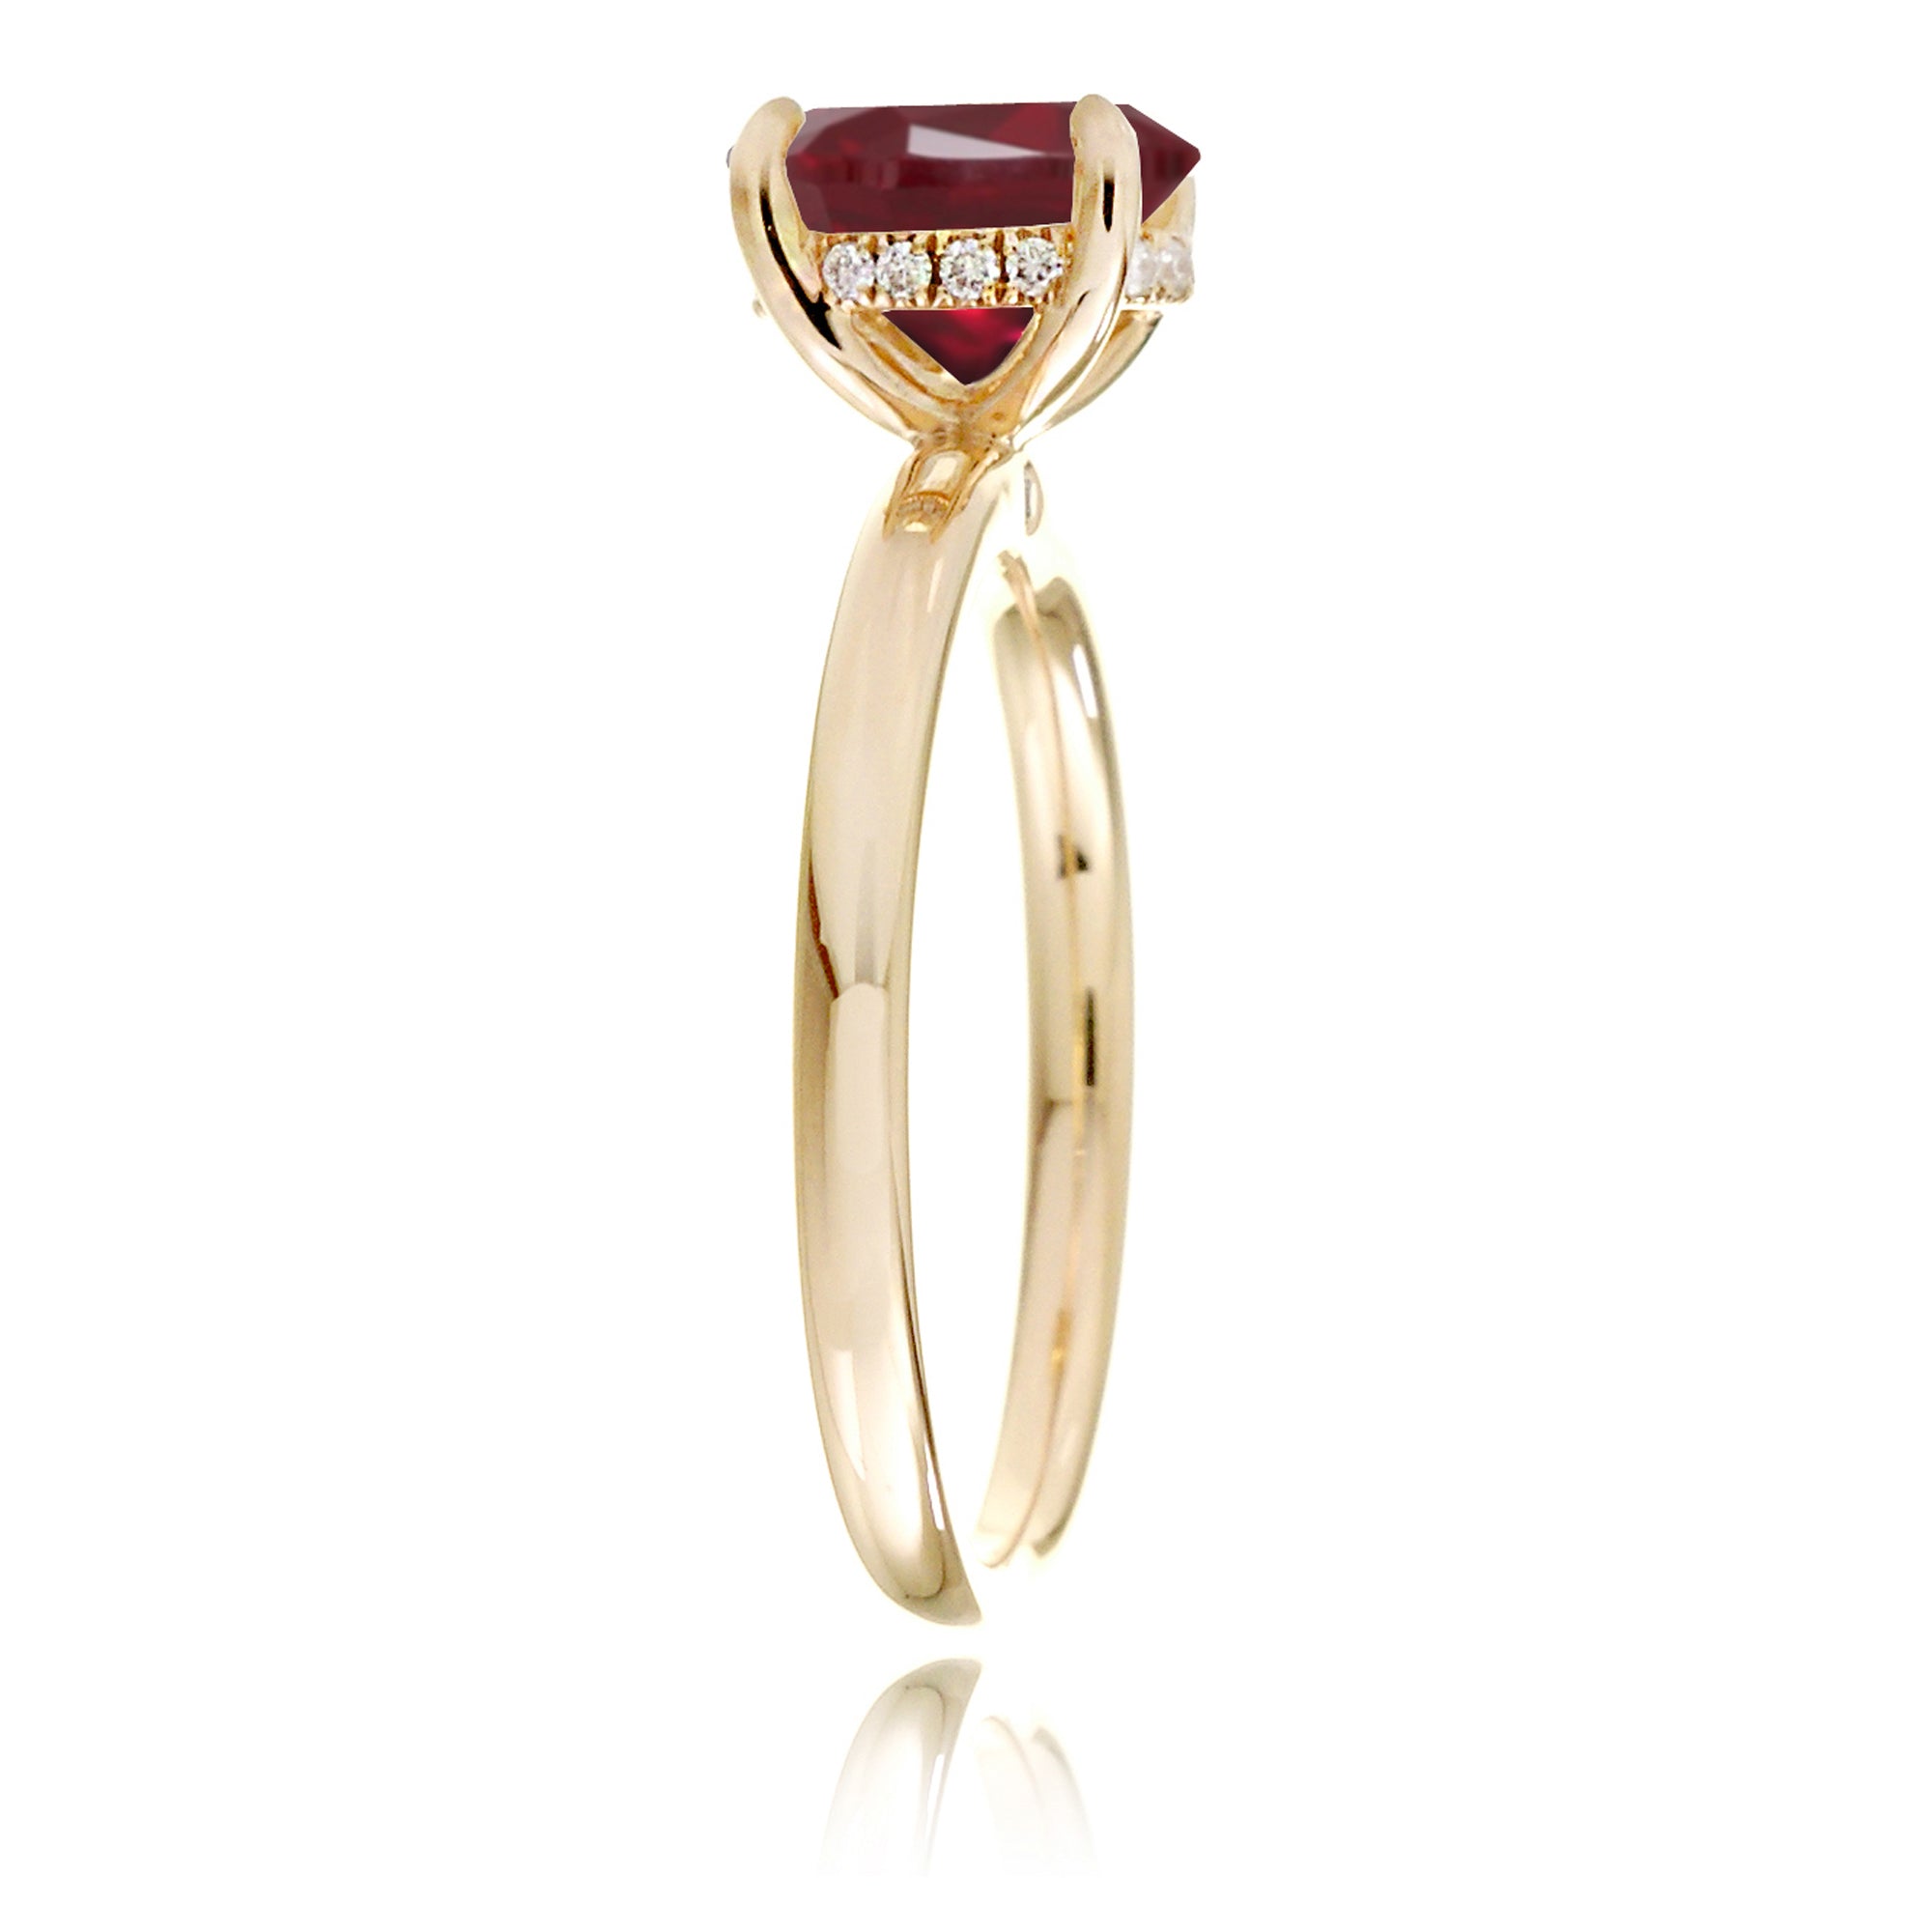 Emerald step cut ruby diamond hidden halo engagement ring in yellow gold